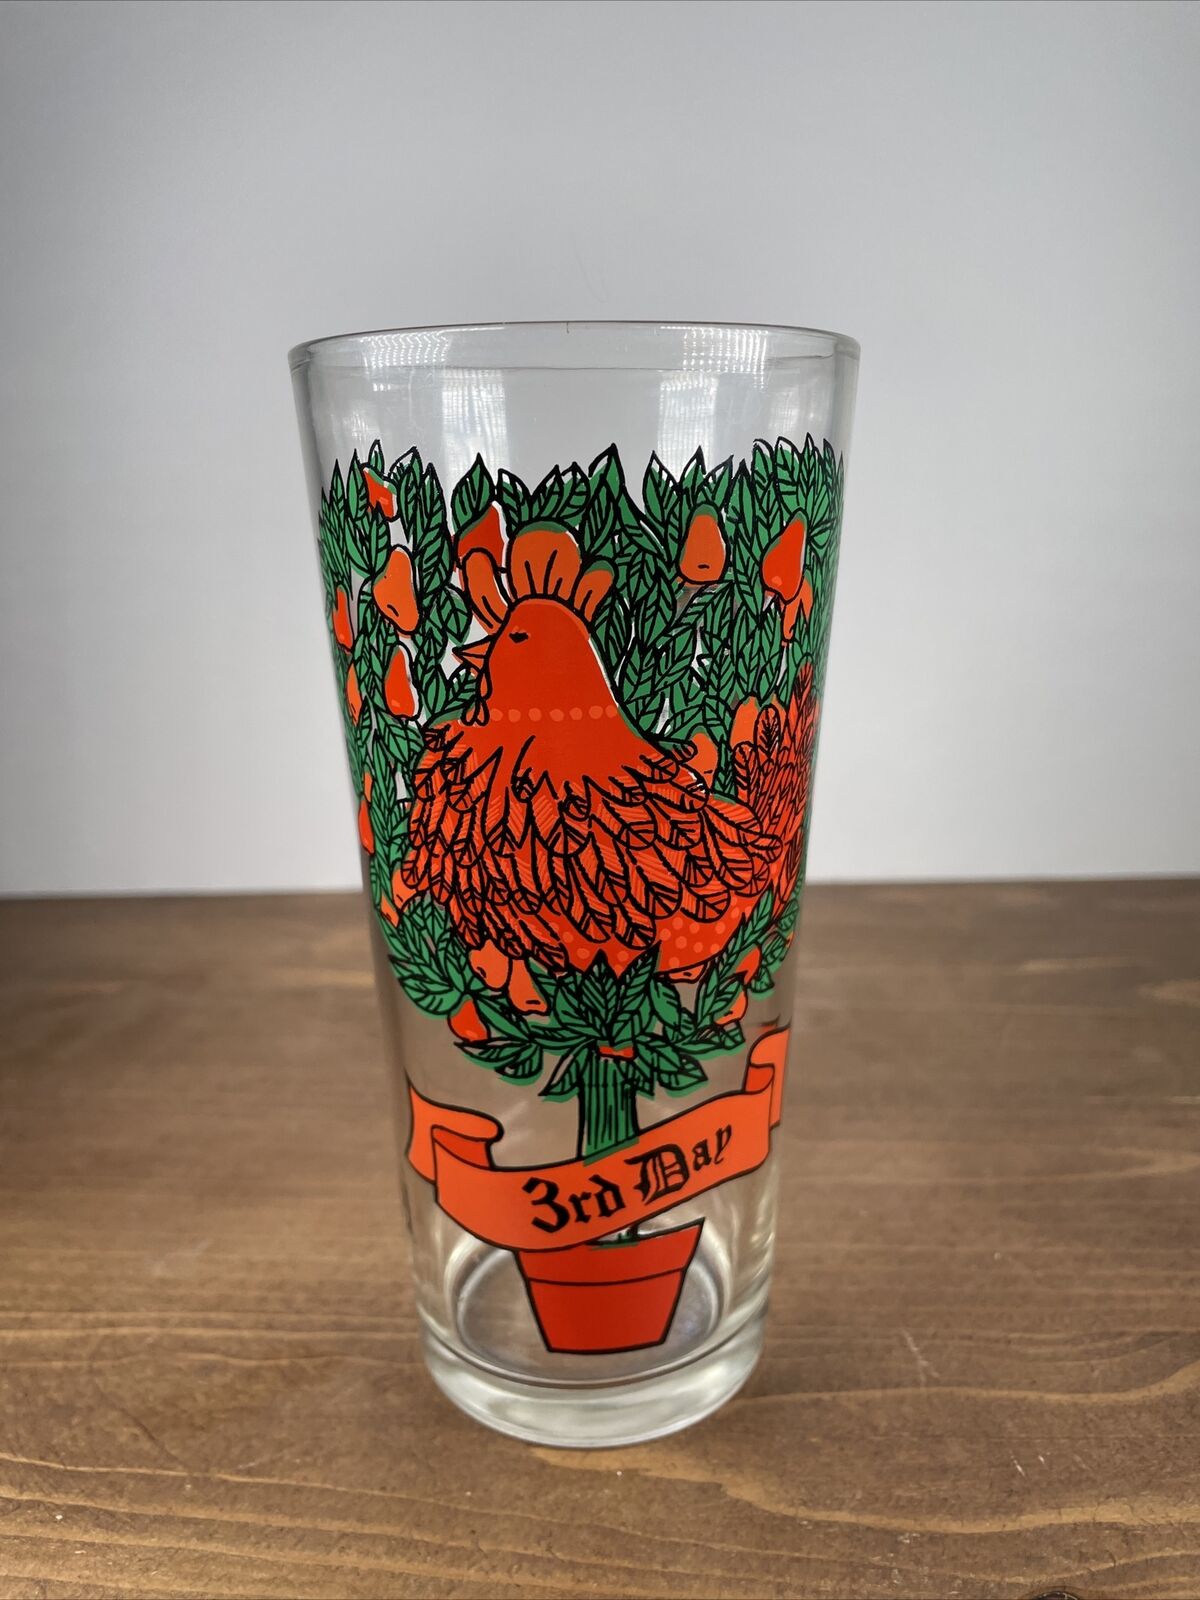 1970\'s TWELVE 12 DAYS OF CHRISTMAS 3RD DAY 3 FRENCH HENS GLASS Pepsi